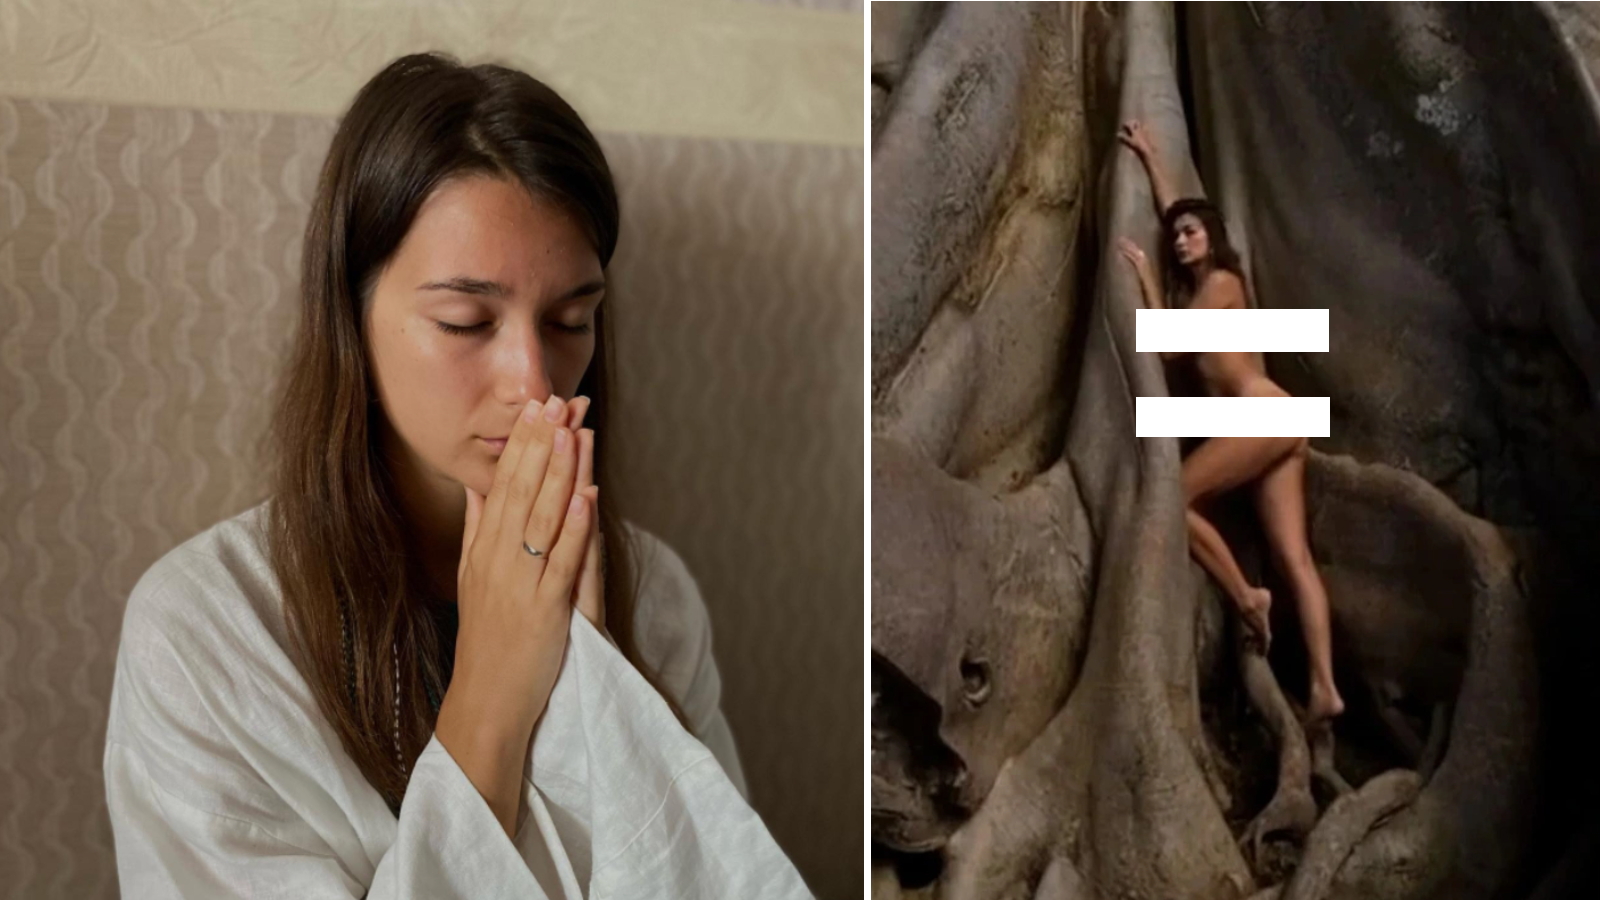 Bali: SM influencer poses nude under sacred tree, attracts jail term and  fine